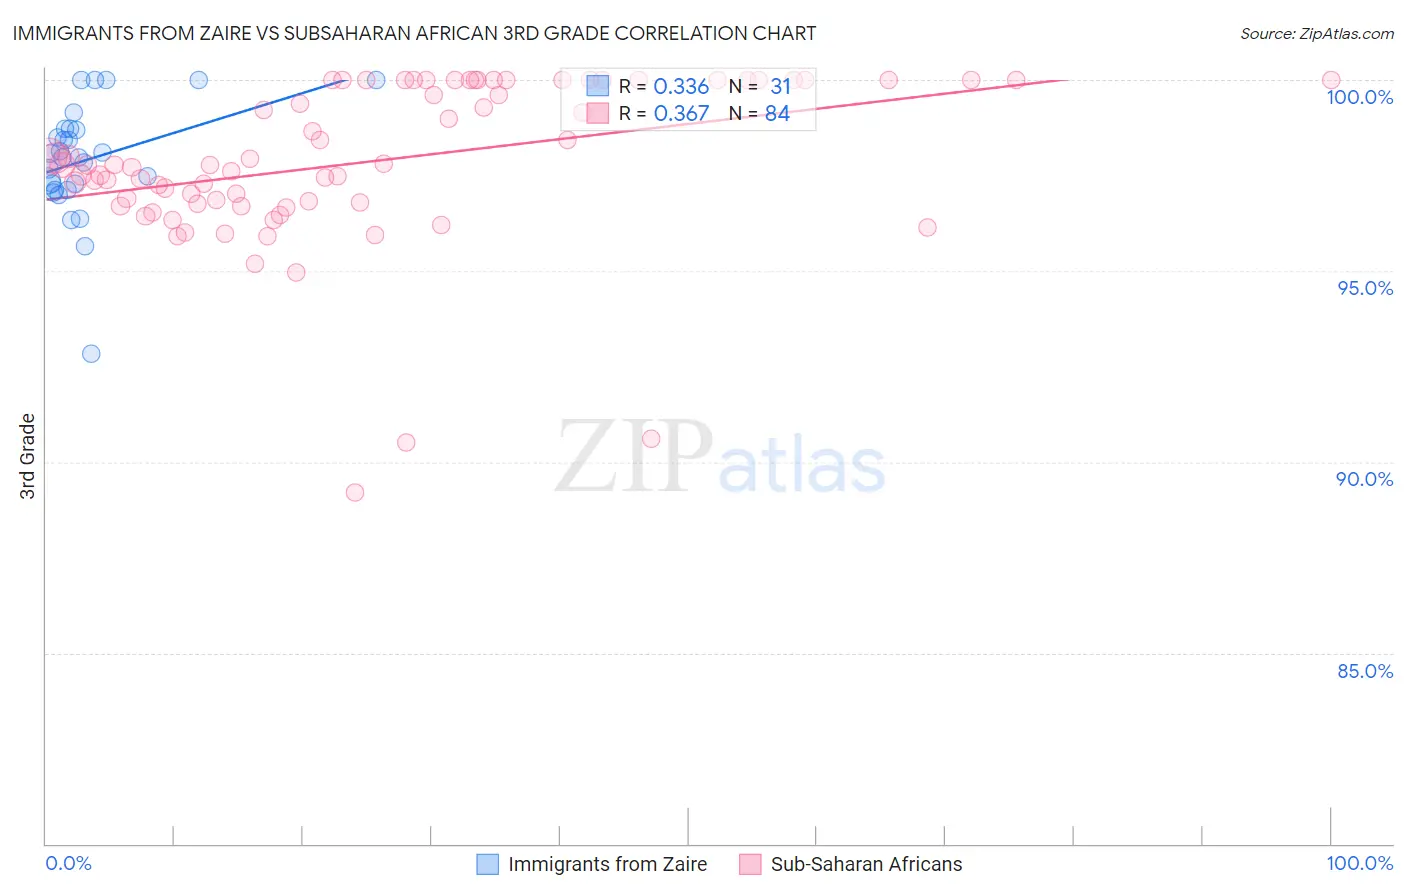 Immigrants from Zaire vs Subsaharan African 3rd Grade